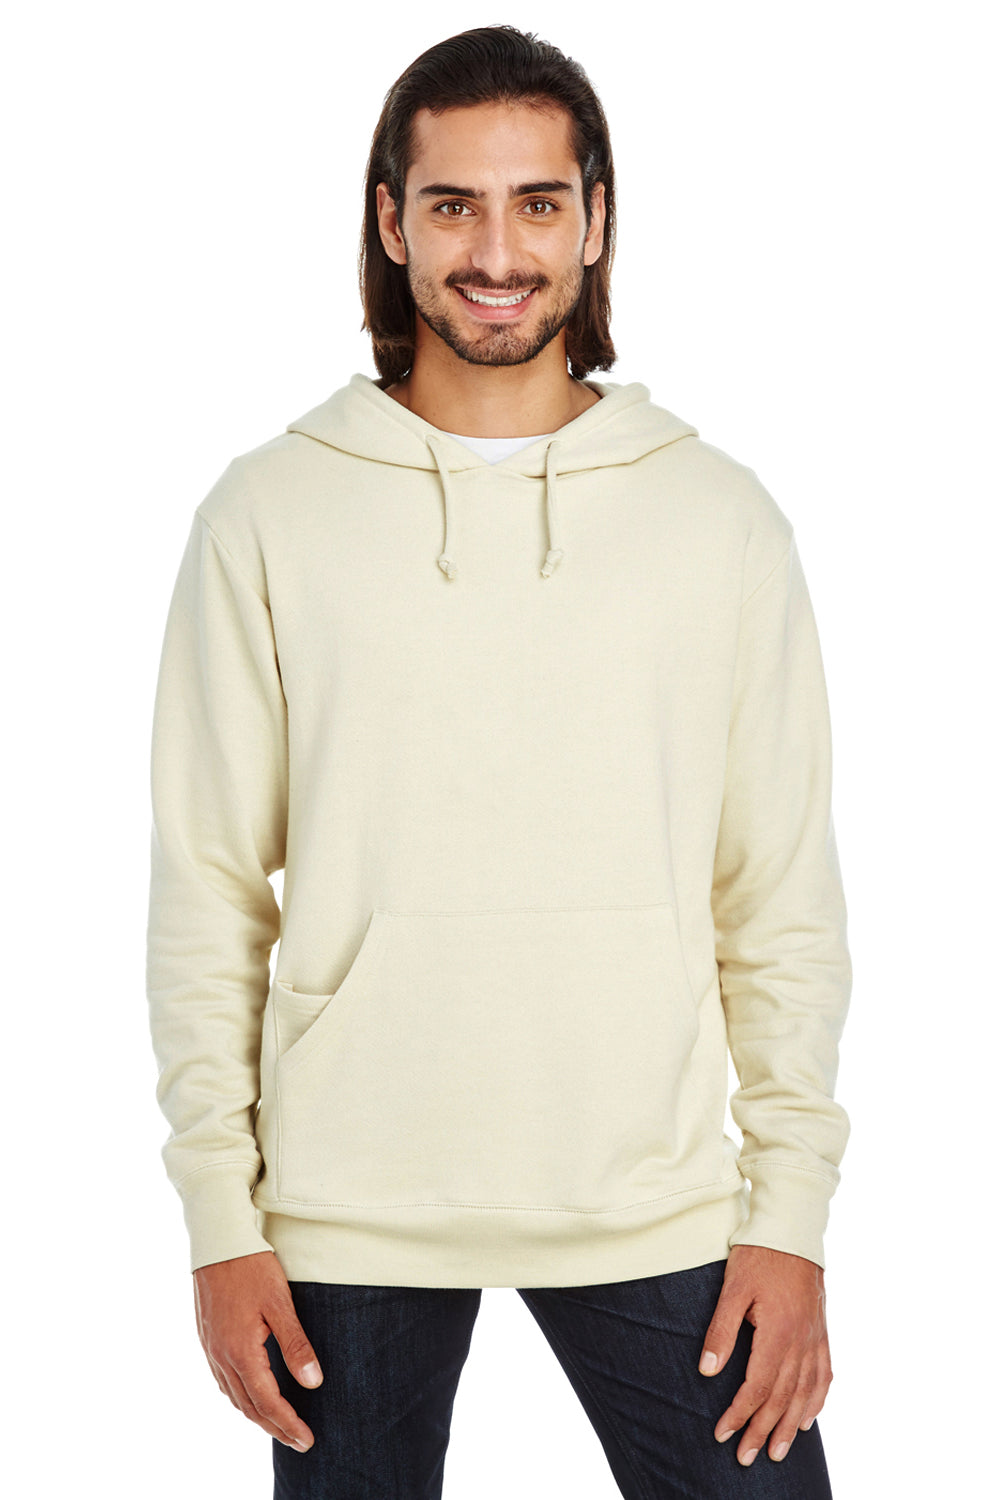 Threadfast Apparel 321H Mens French Terry Hooded Sweatshirt Hoodie Cream Front